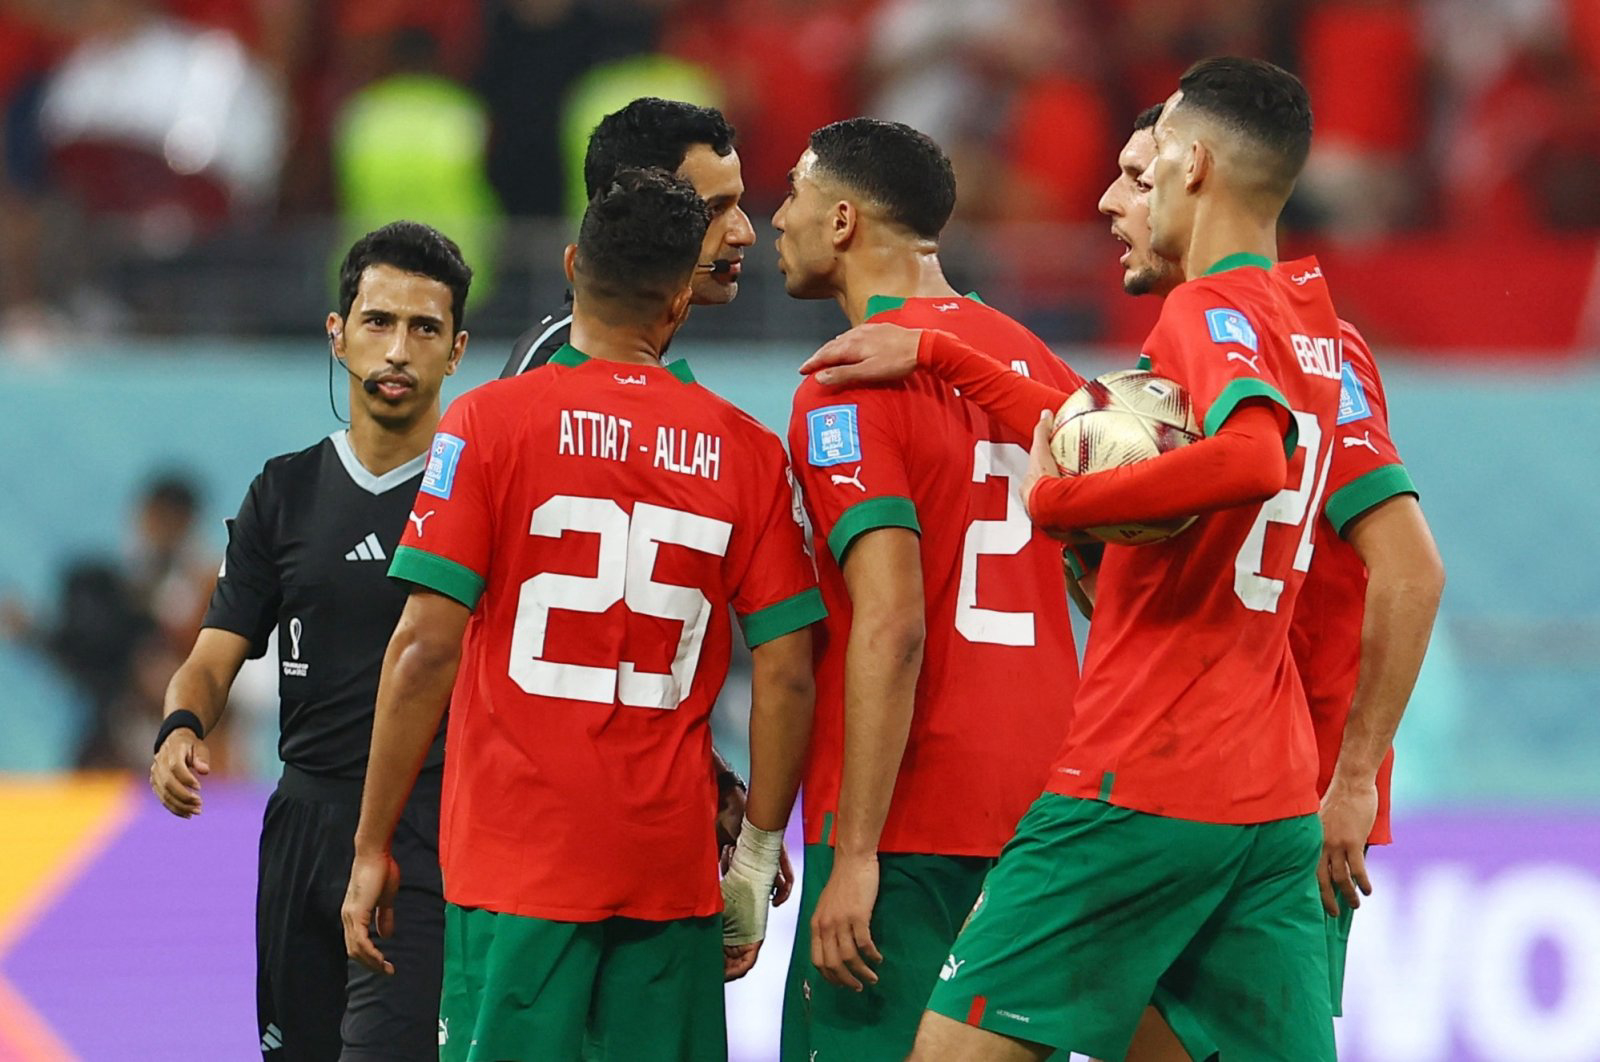 Morocco Football Federation Threatens to Boycott African Nations Championship | The African Exponent.